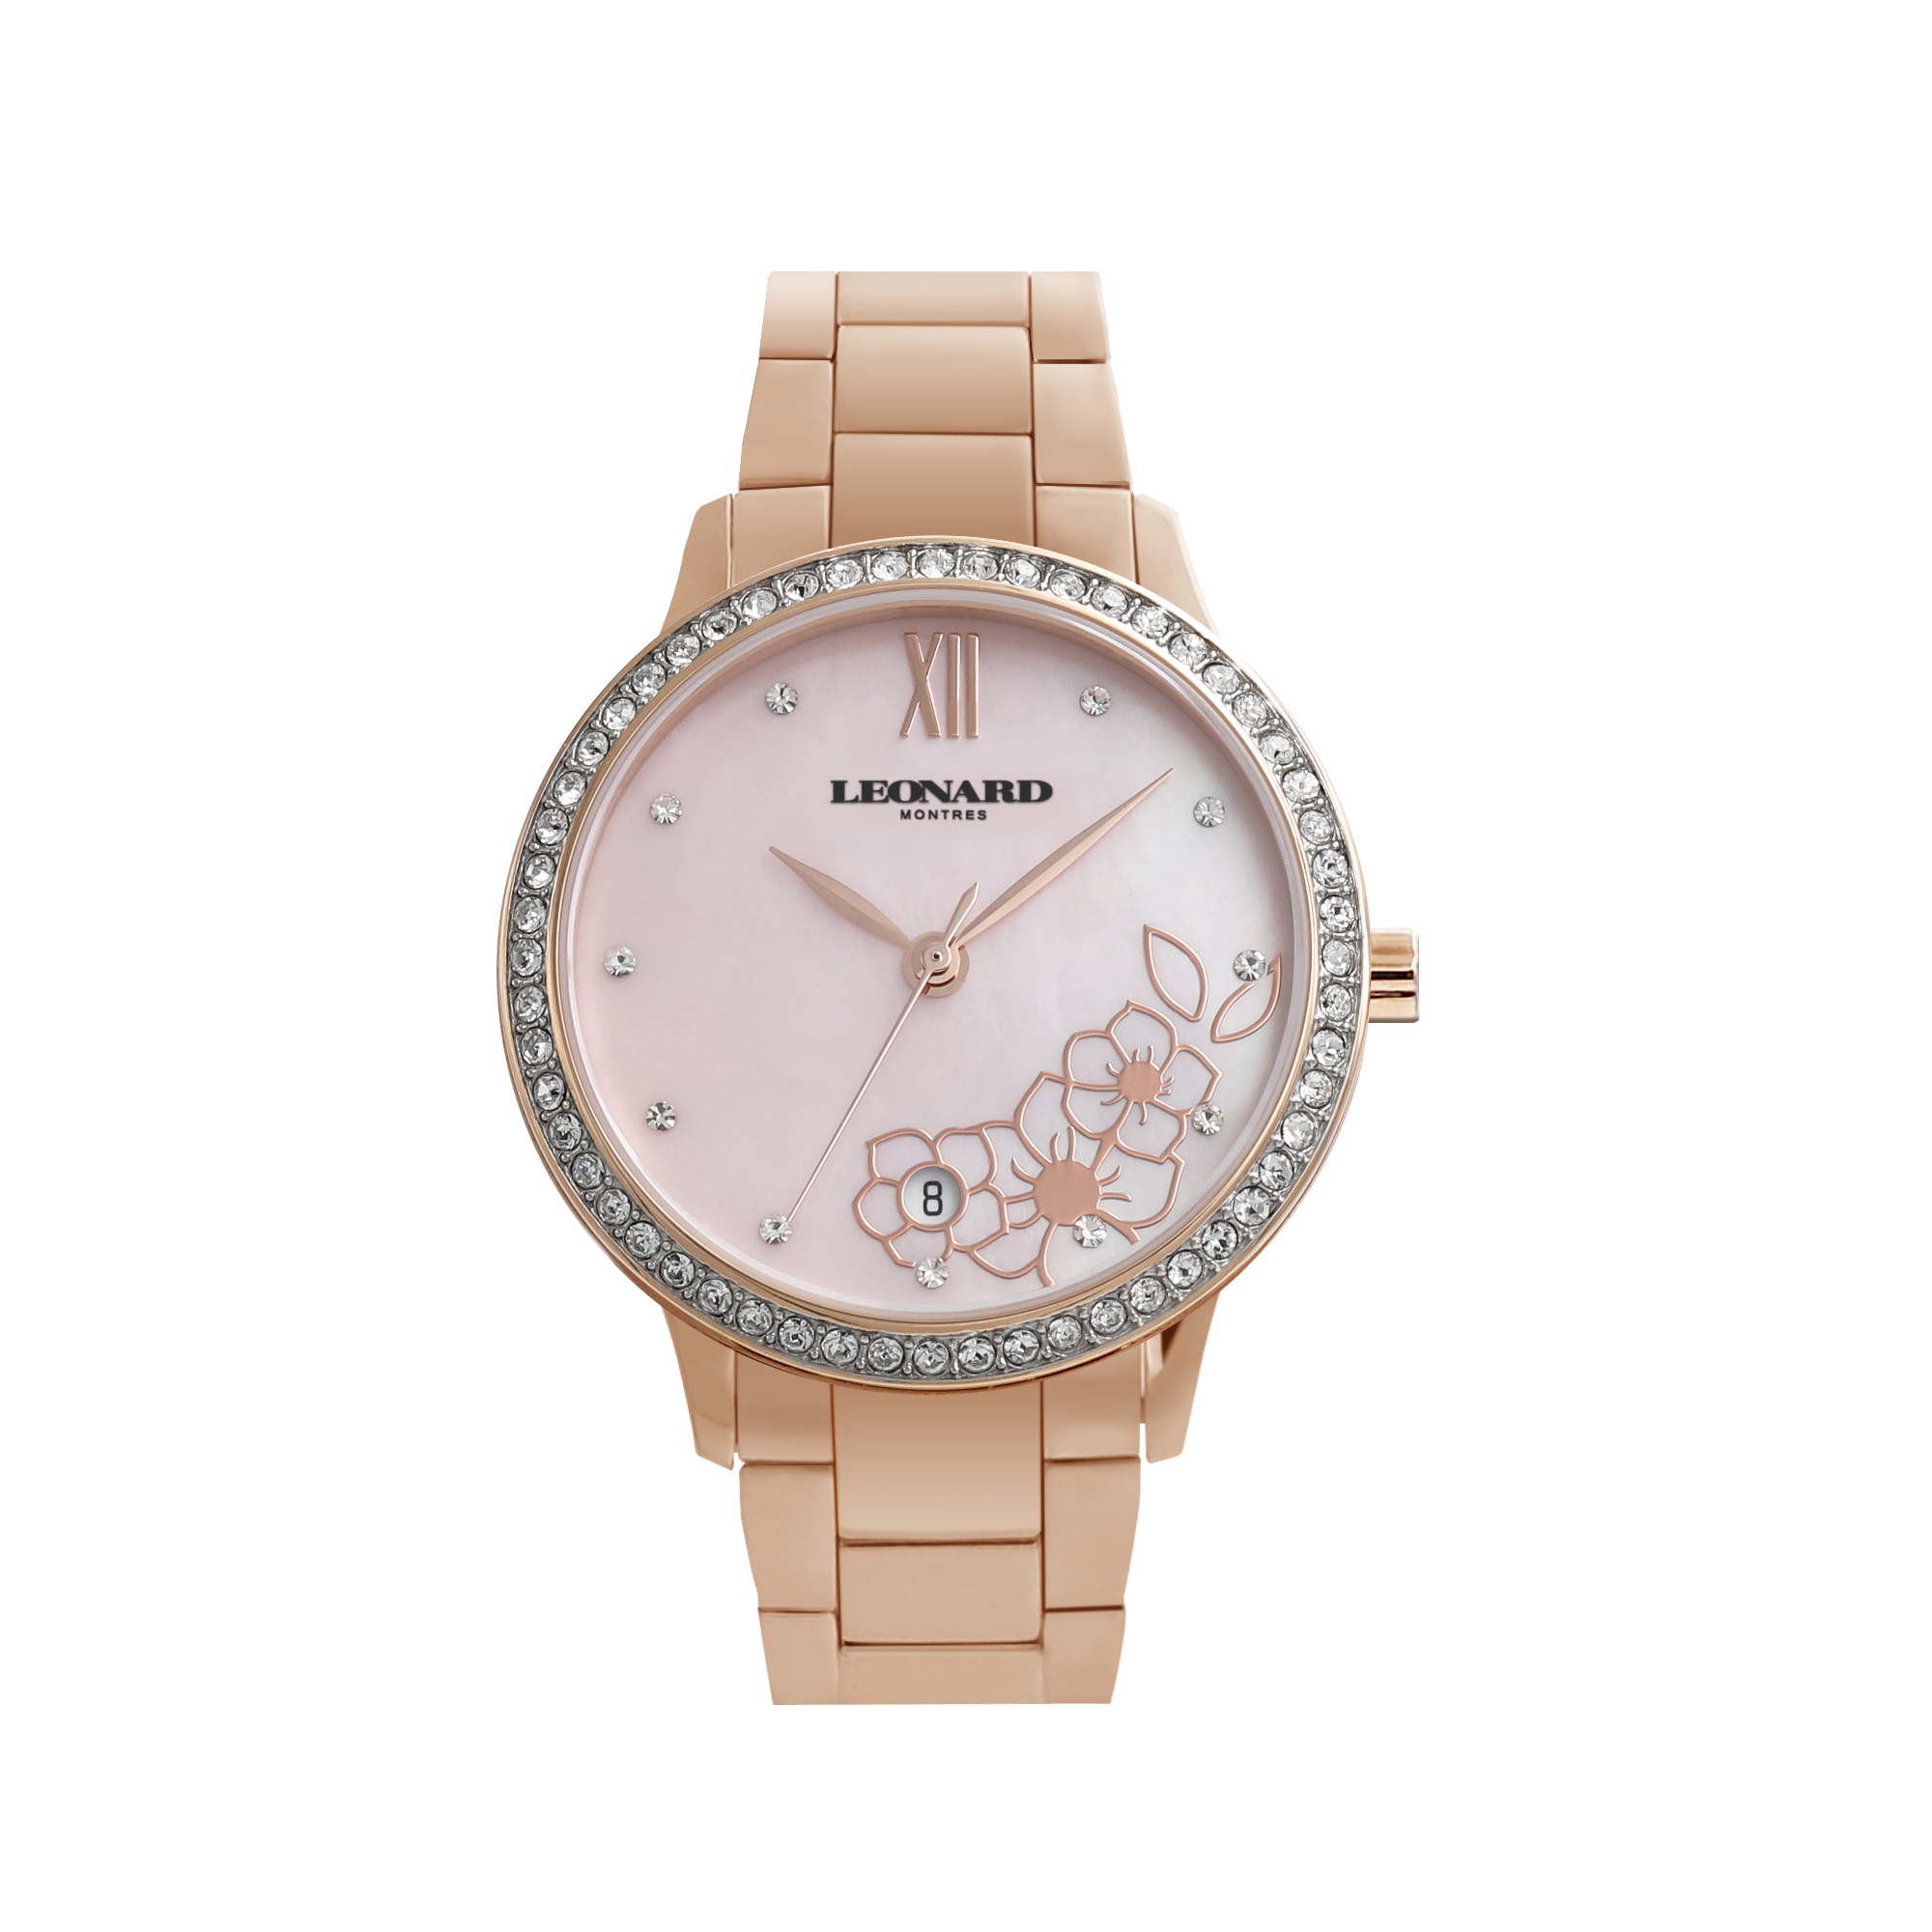 Leonard Montres Swiss ladies watch PVD rose gold case with pink Mother-of-Pearl dial with floral print. LL101815